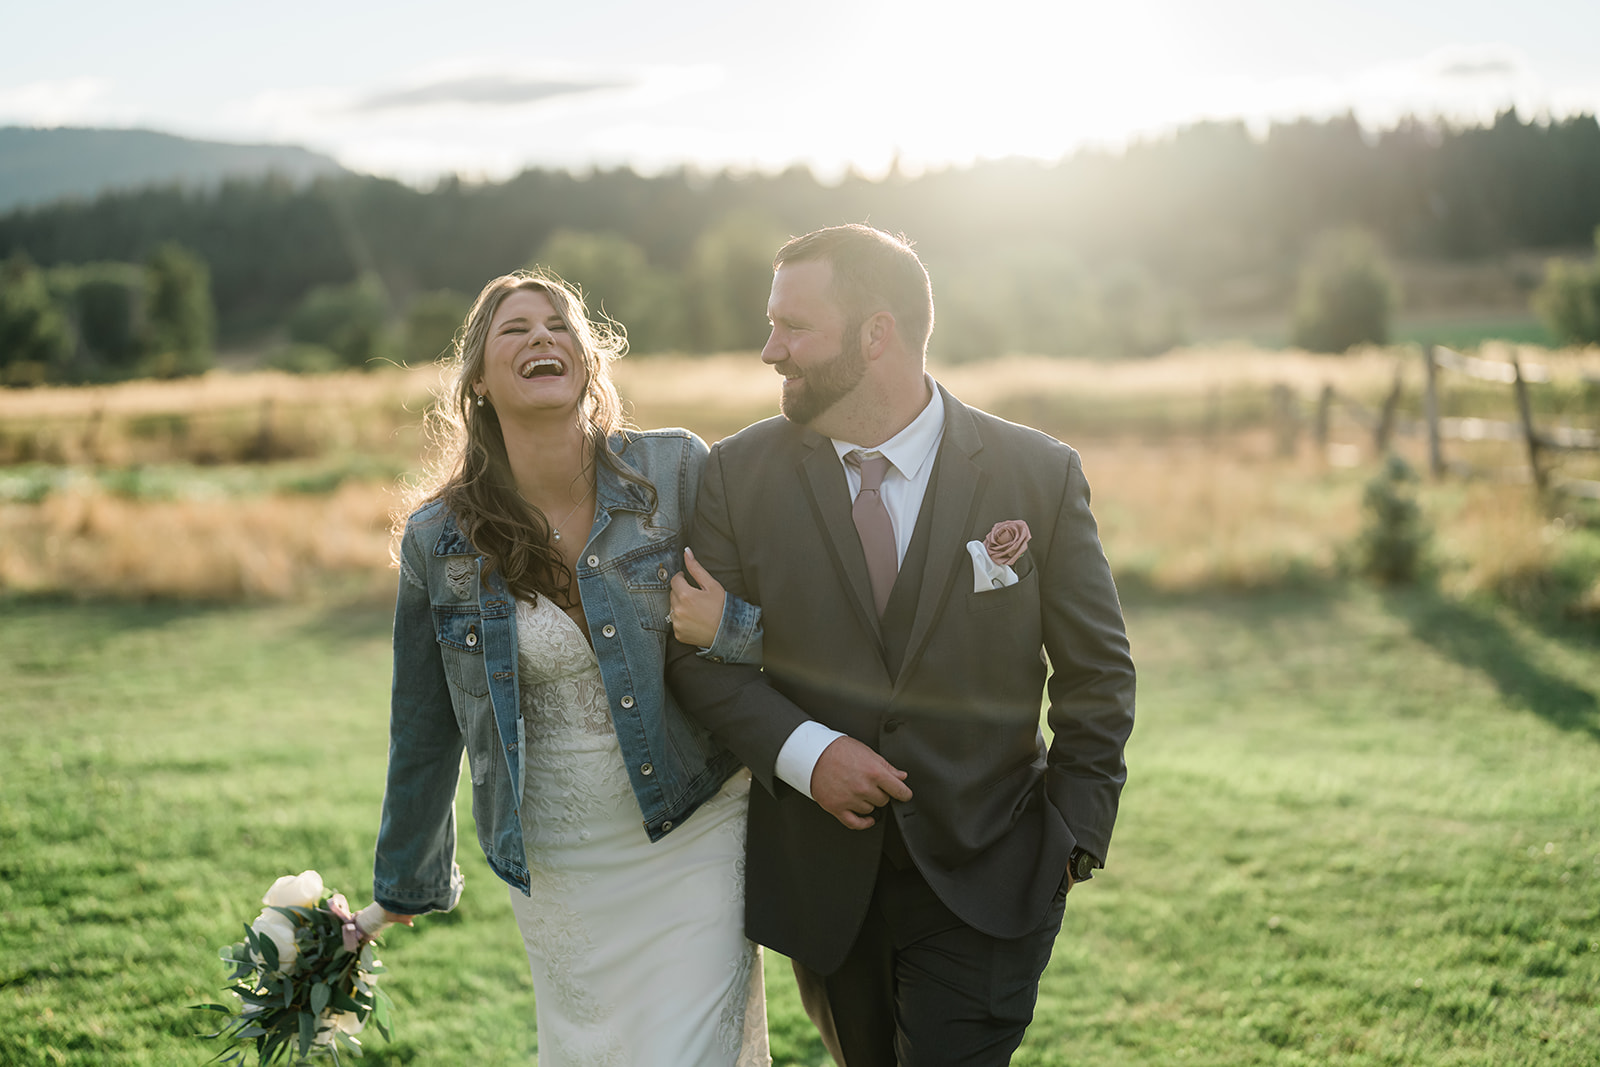 Couple portrait at a Cattle Barn Wedding